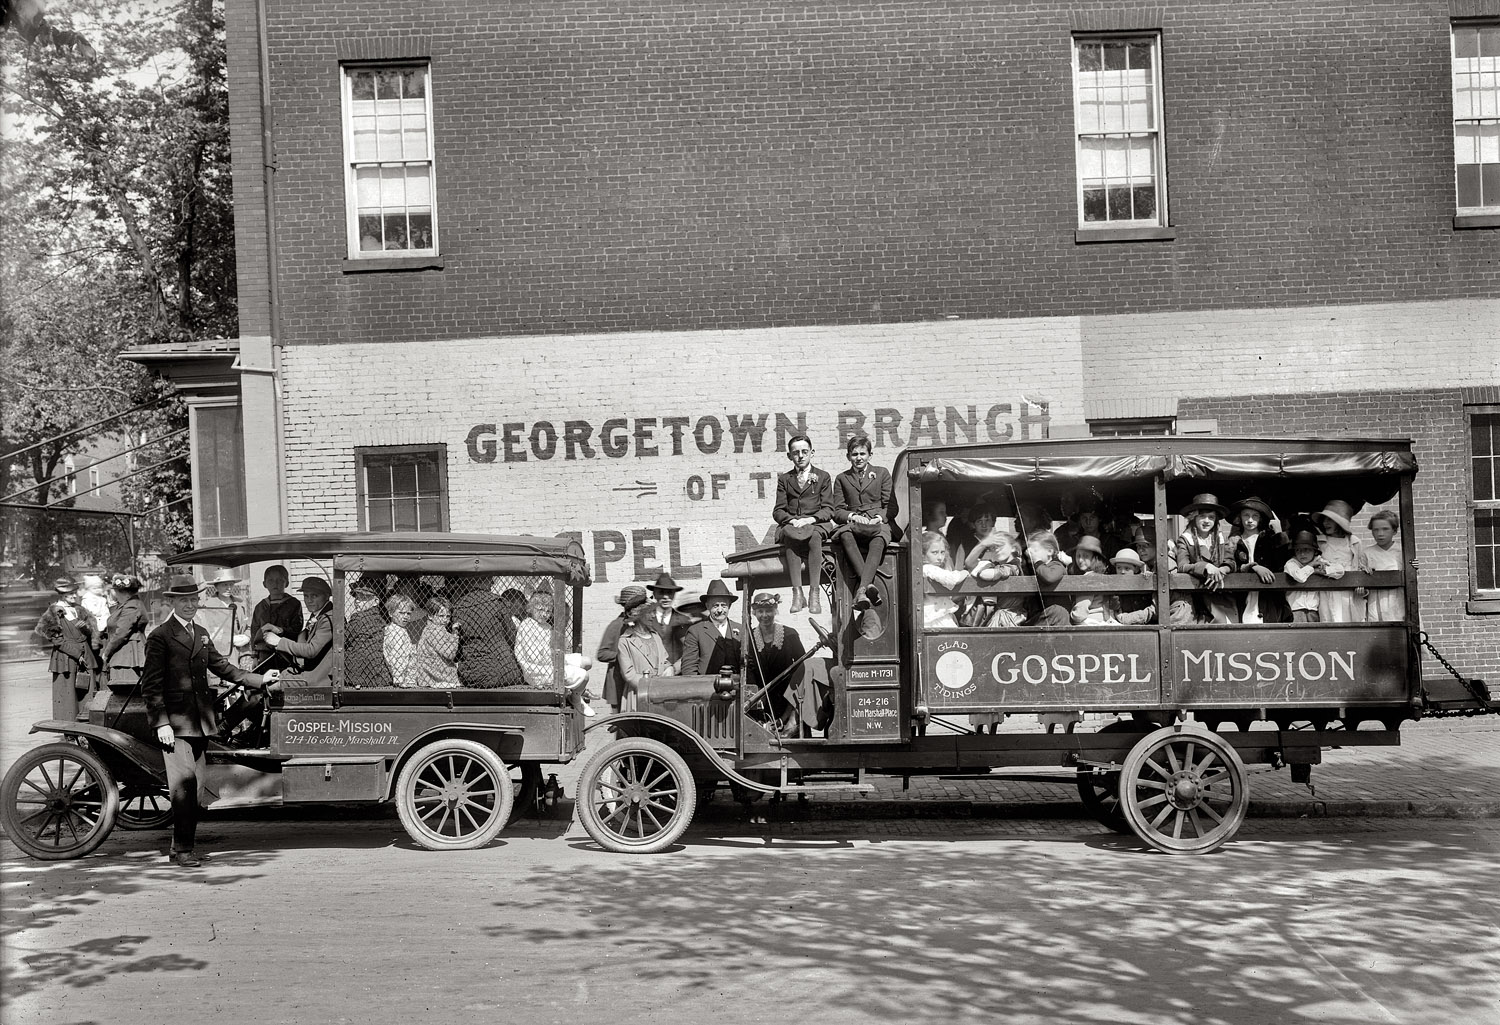 "Gospel Mission, Georgetown Sunday school group, circa 1920." View full size. National Photo Company Collection glass negative, Library of Congress.